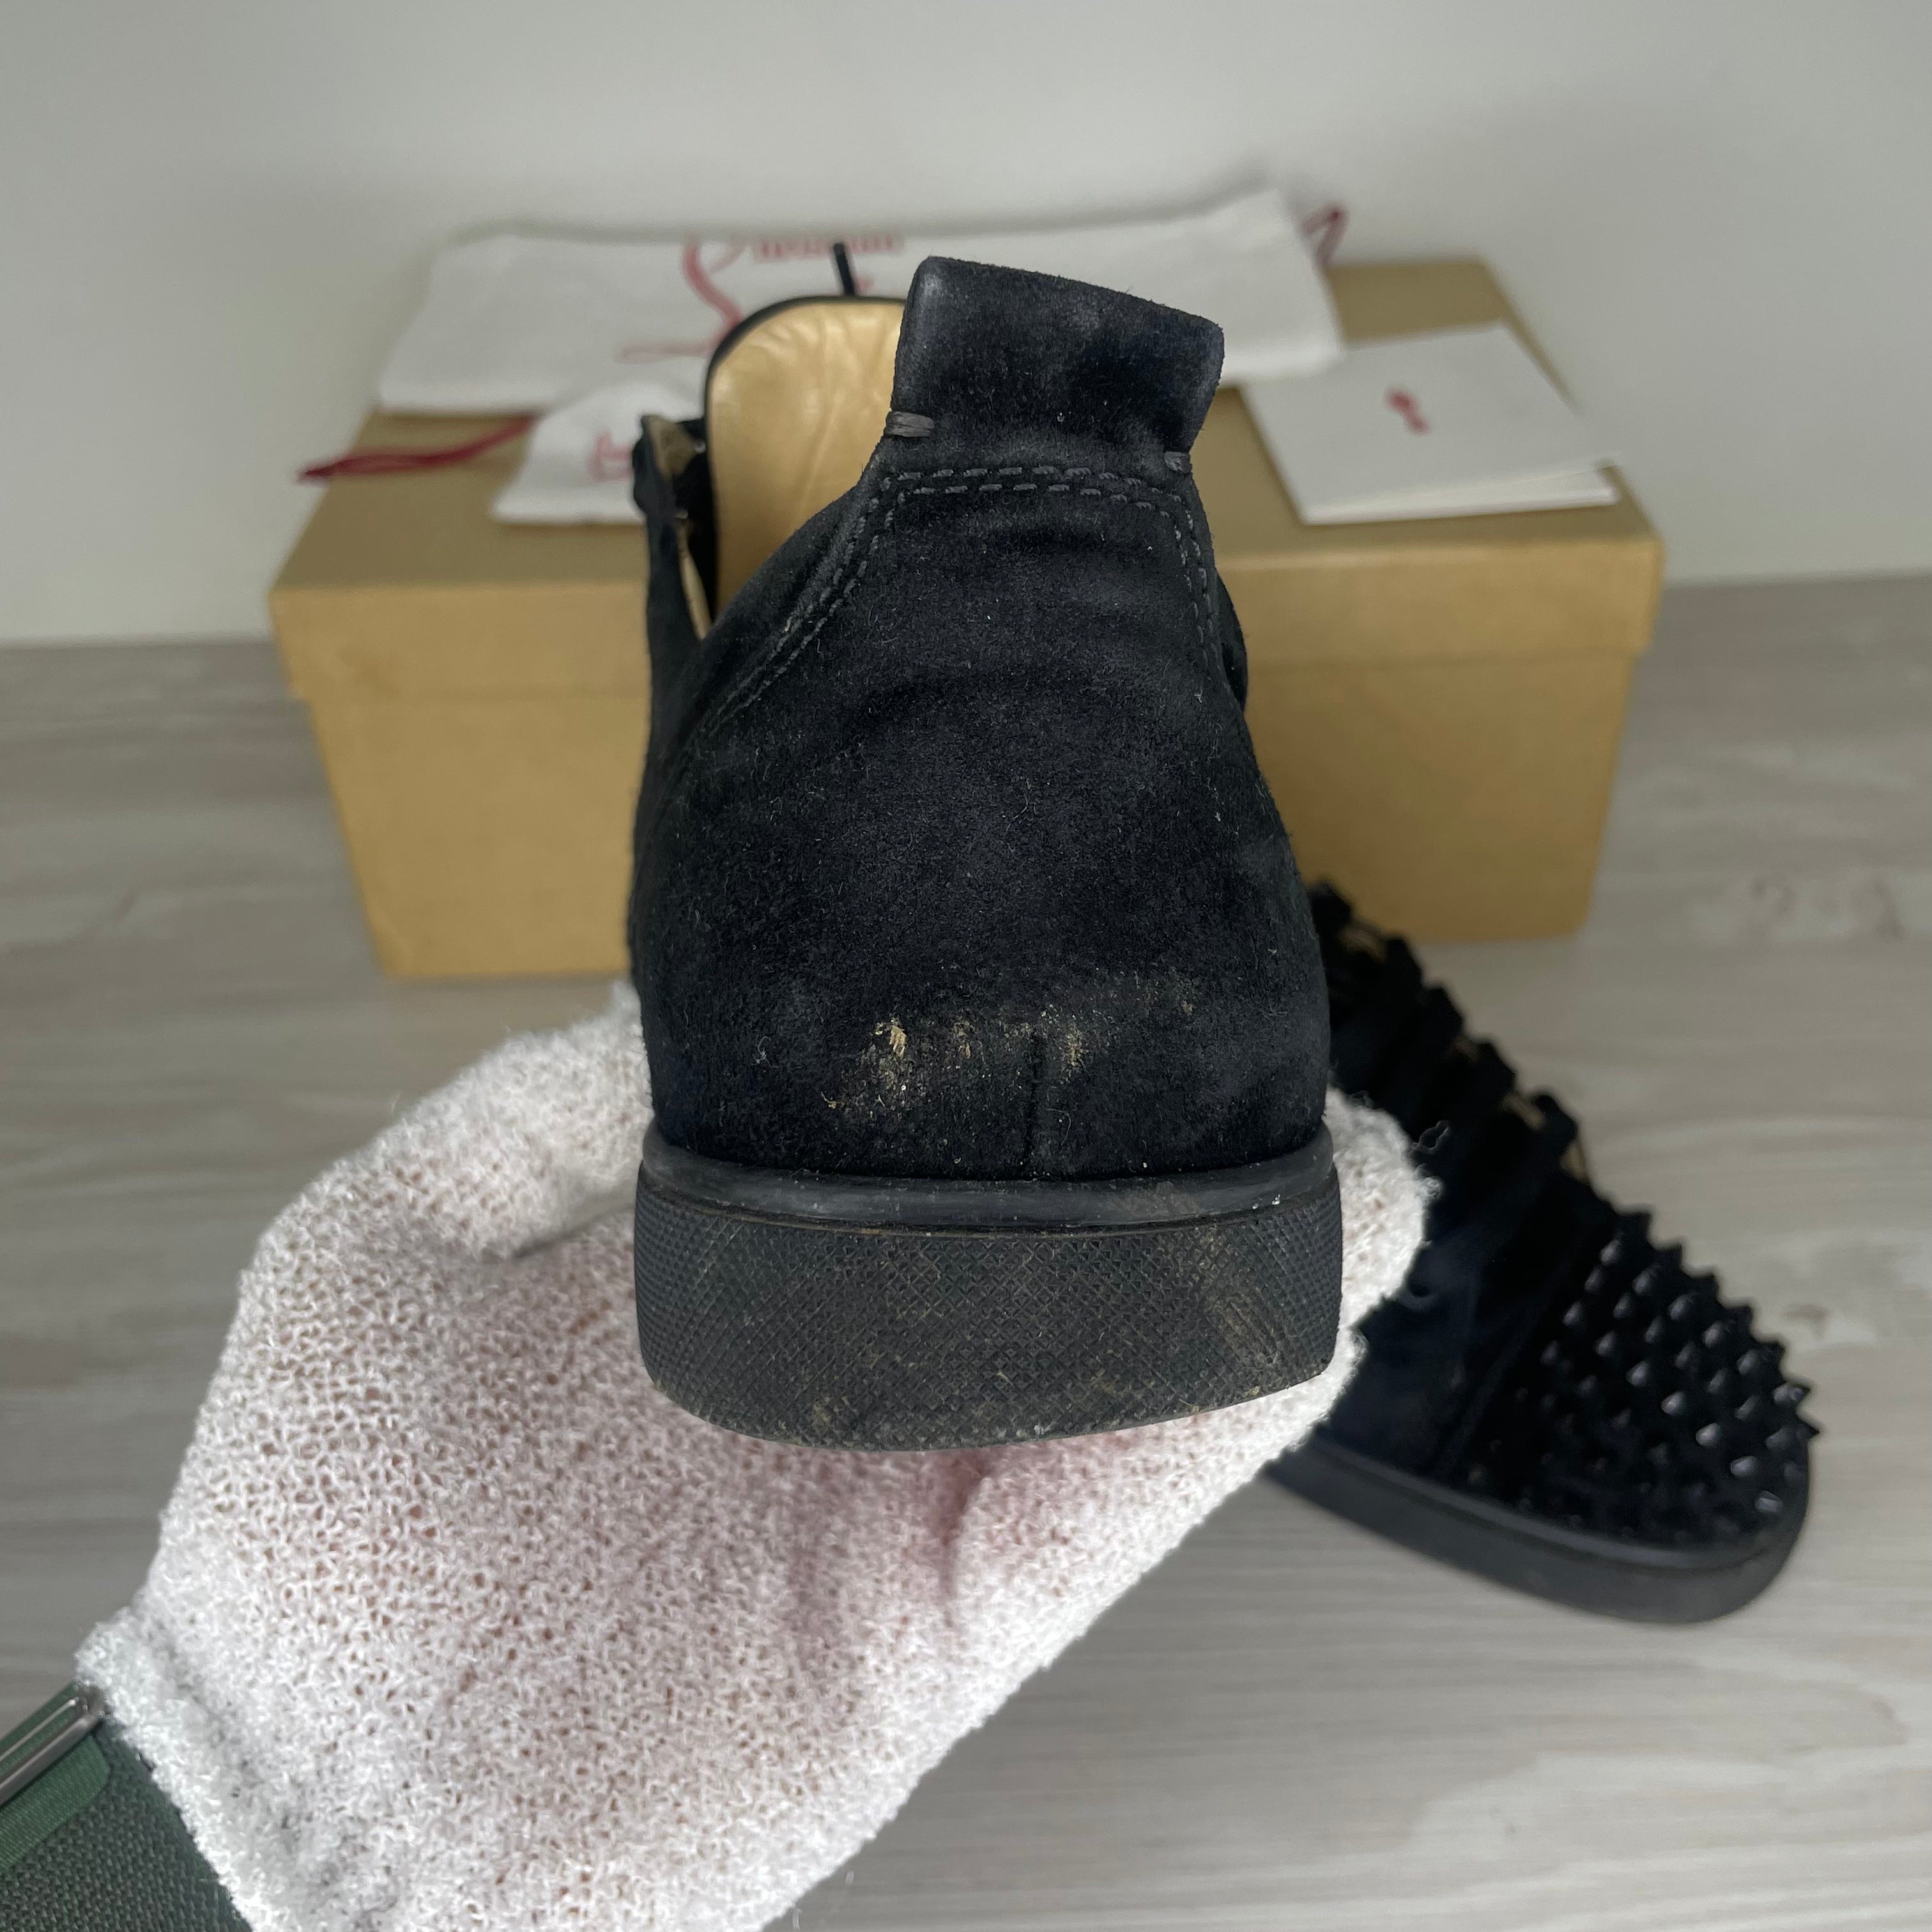 Christian Louboutin Sneakers, 'Black Suede' Junior Spikes (40.5)